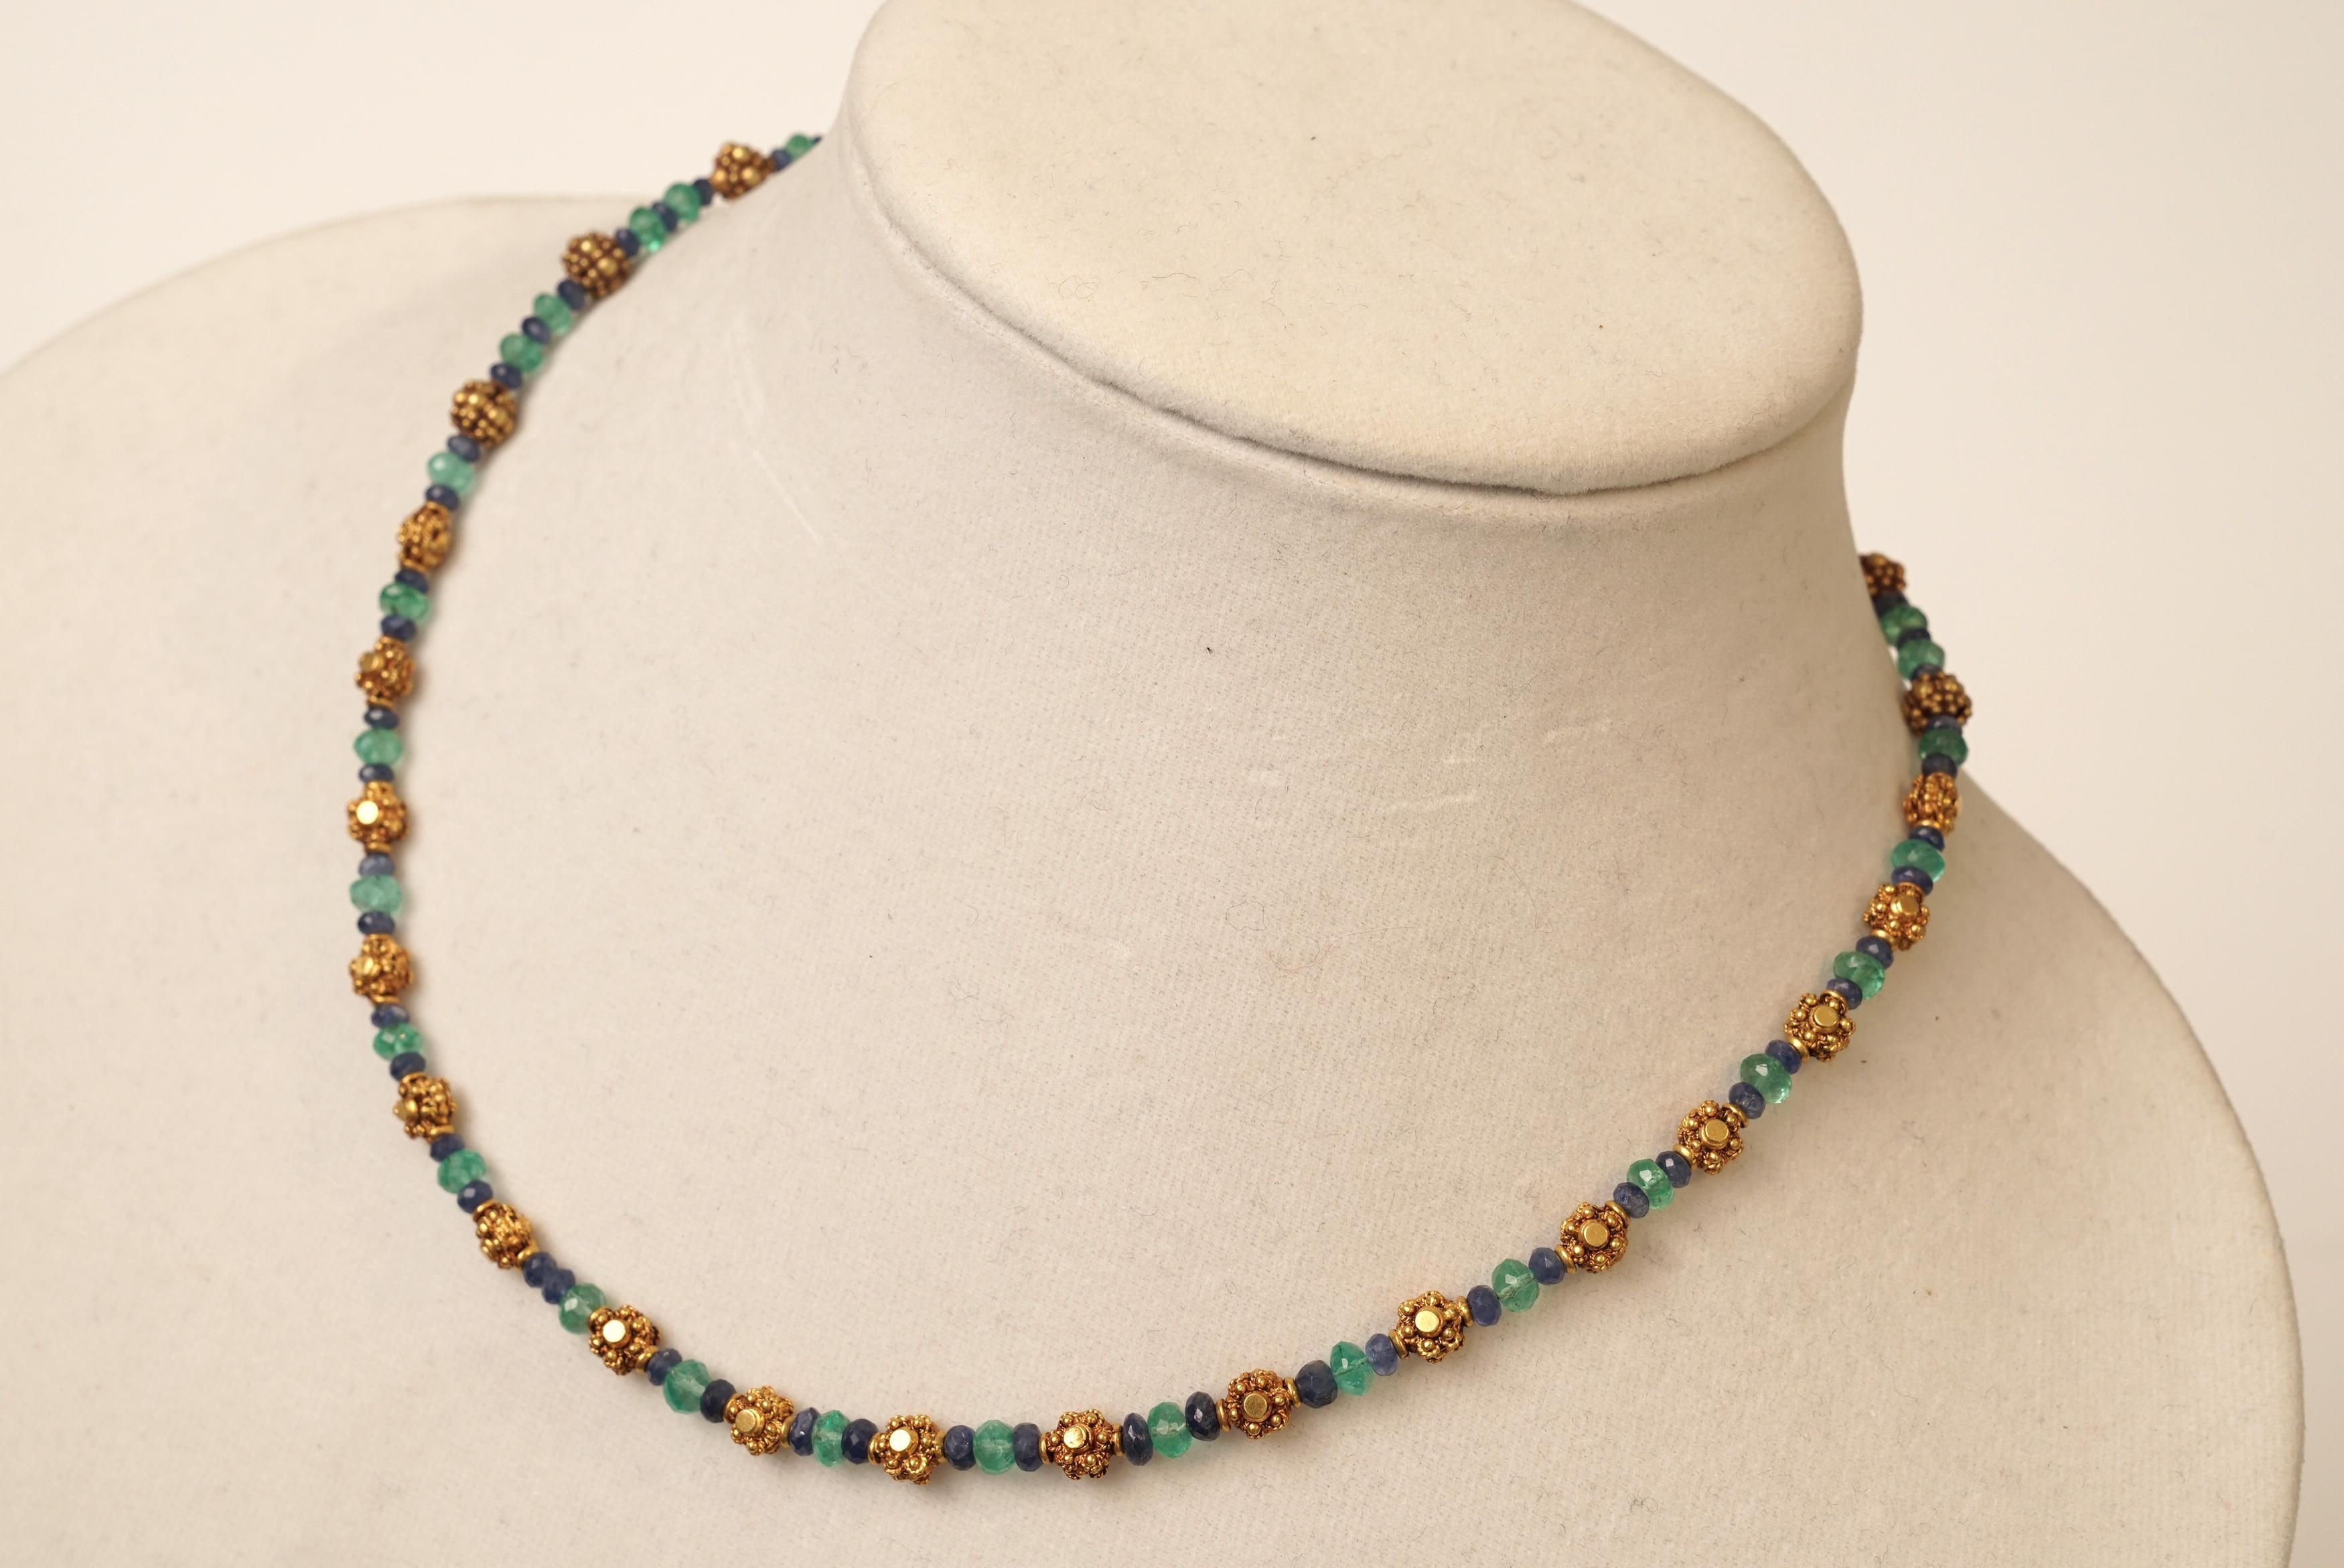 A delicate yet significant 22K gold necklace with faceted blue sapphires and faceted Colombian emeralds.  The gold beads have a flower motif and have significant gold weight and fine granulation work.  S-hook clasp and extra chain to convert between